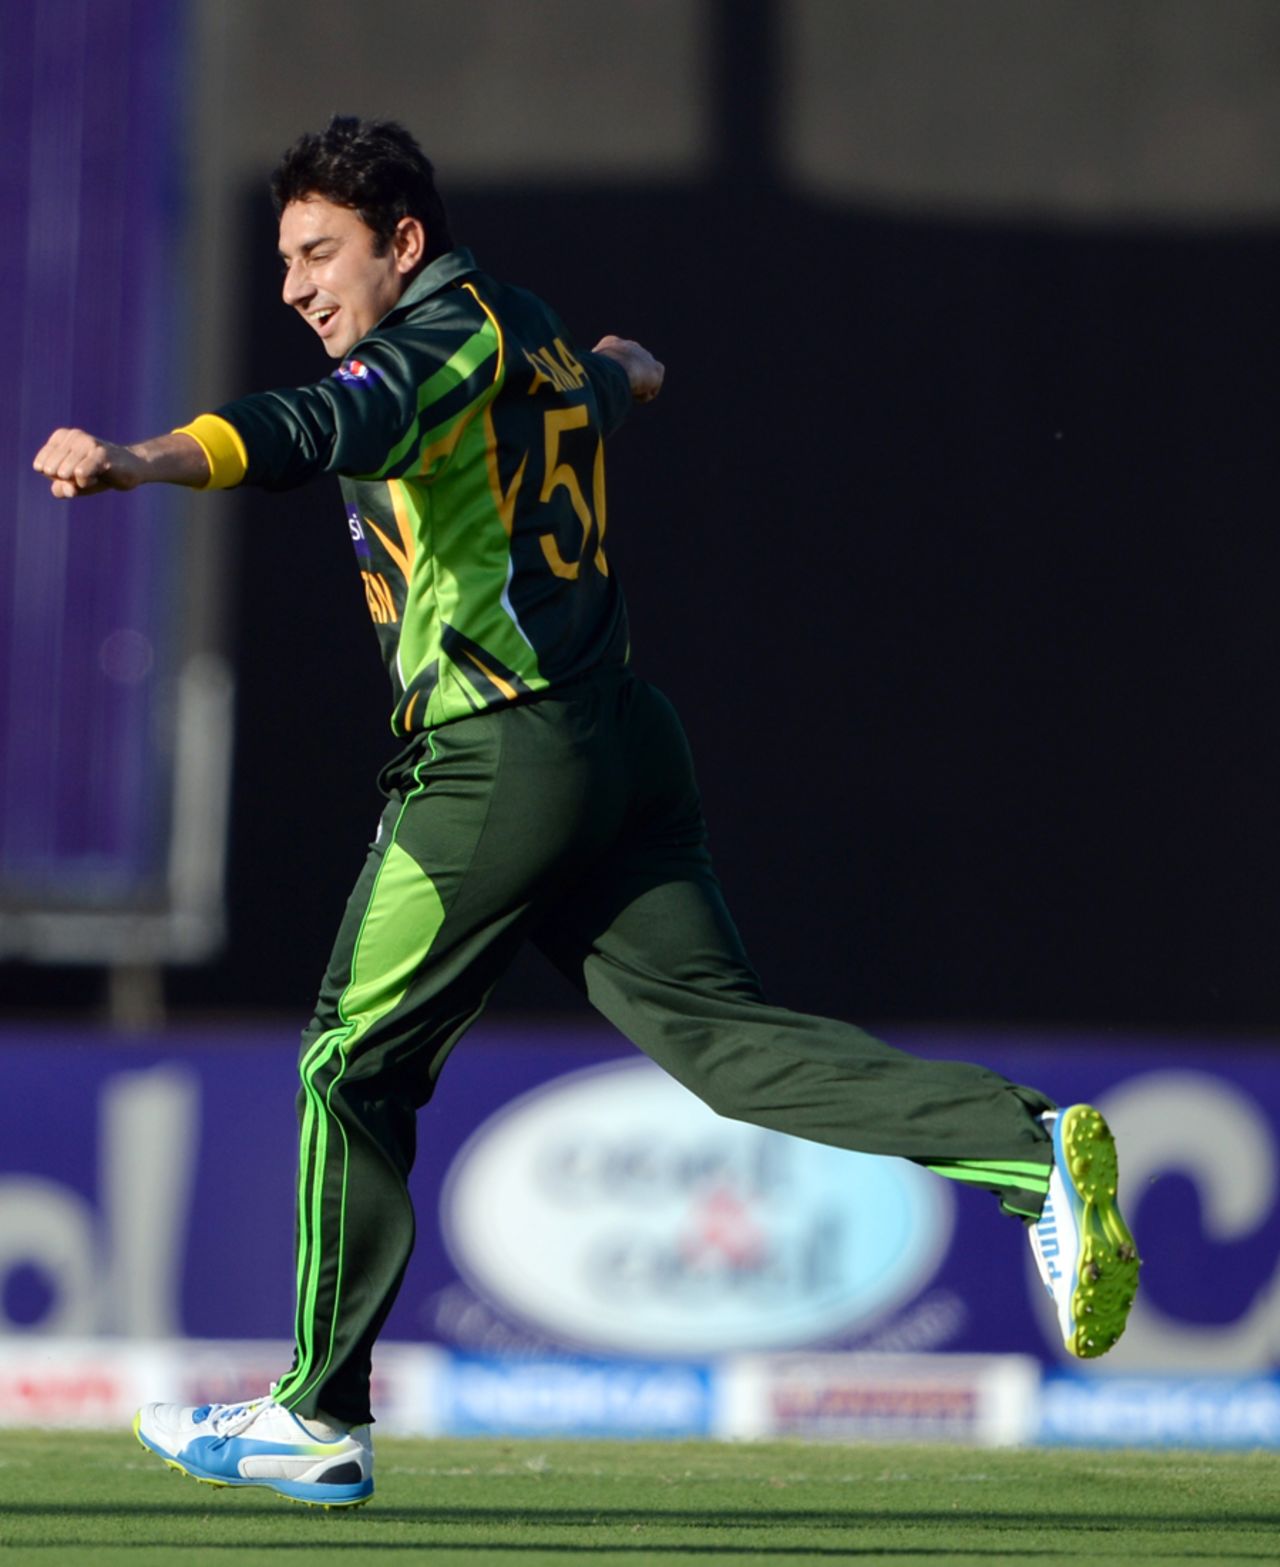 Saeed Ajmal takes off after claiming a wicket, Pakistan v South Africa, 1st ODI, Sharjah, October 30, 2013